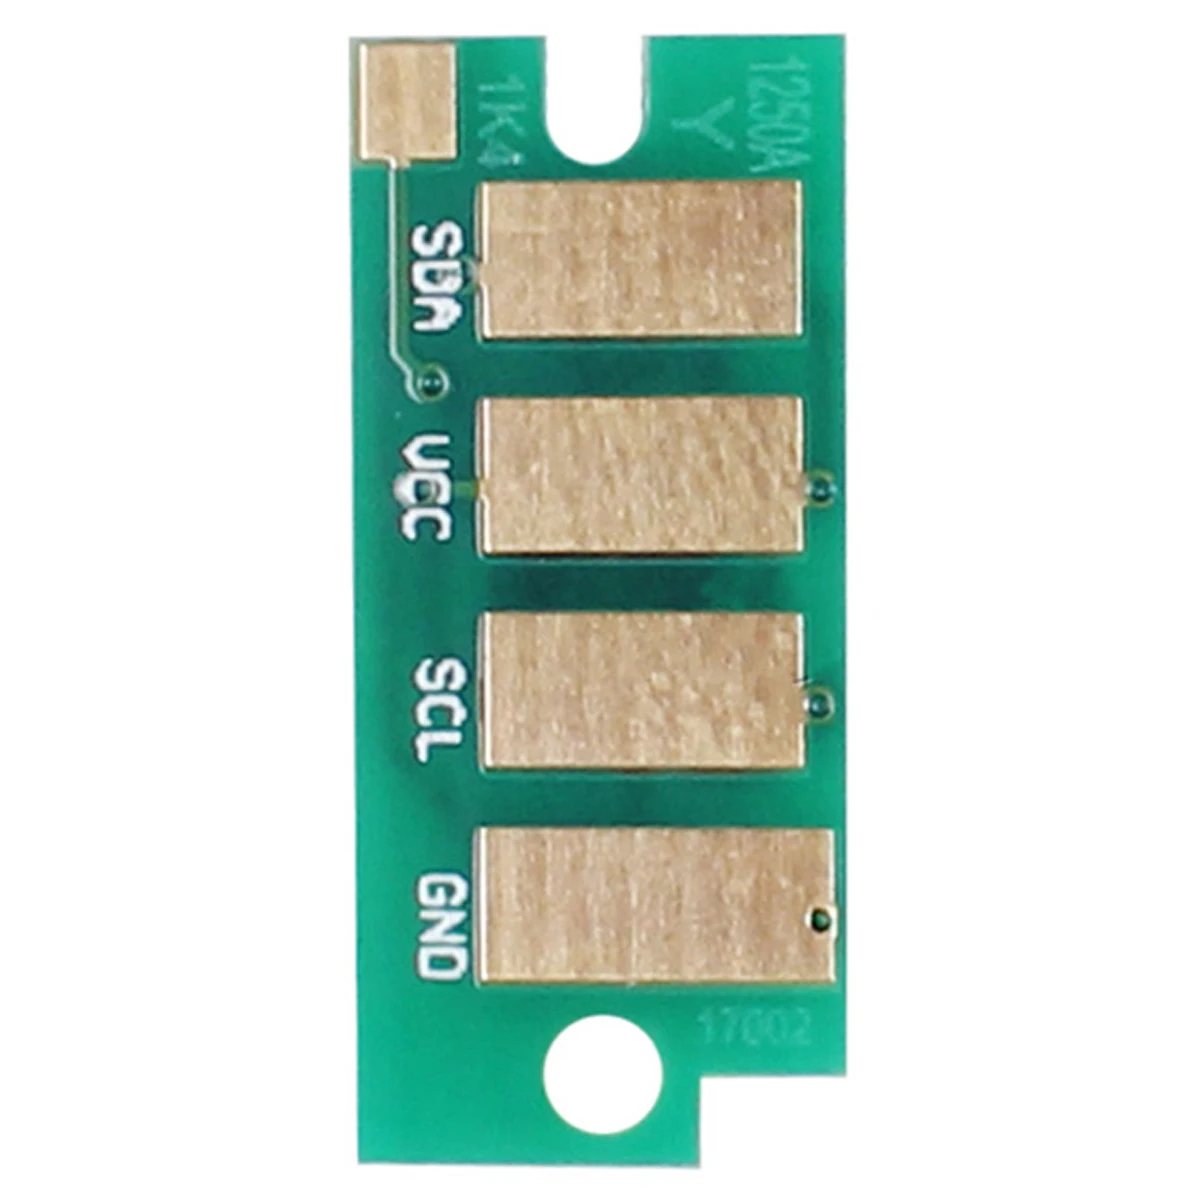 

Toner Chip for Fuji Xerox Phaser 6510 DN N 6510 DNI WorkCentre WC 6515DN 6515 DNI 6515 DNW 6515 N 6515 NW 106R03694 106R03695